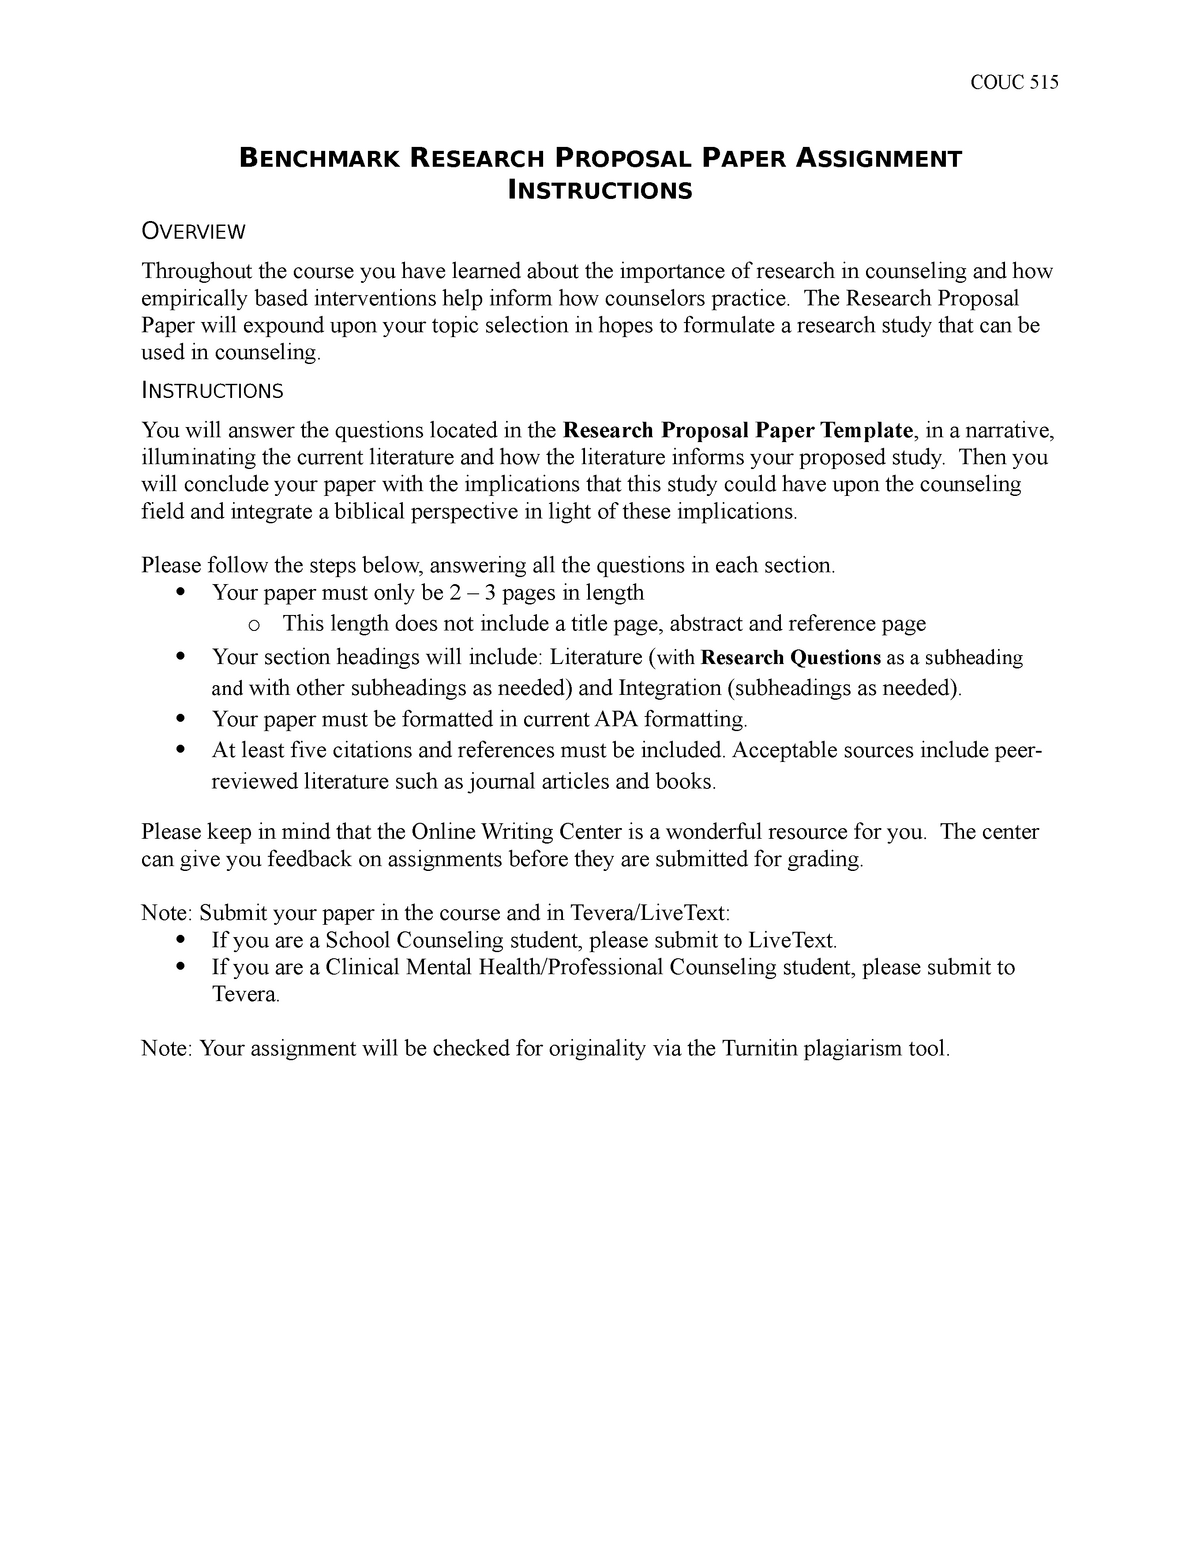 benchmark research proposal paper